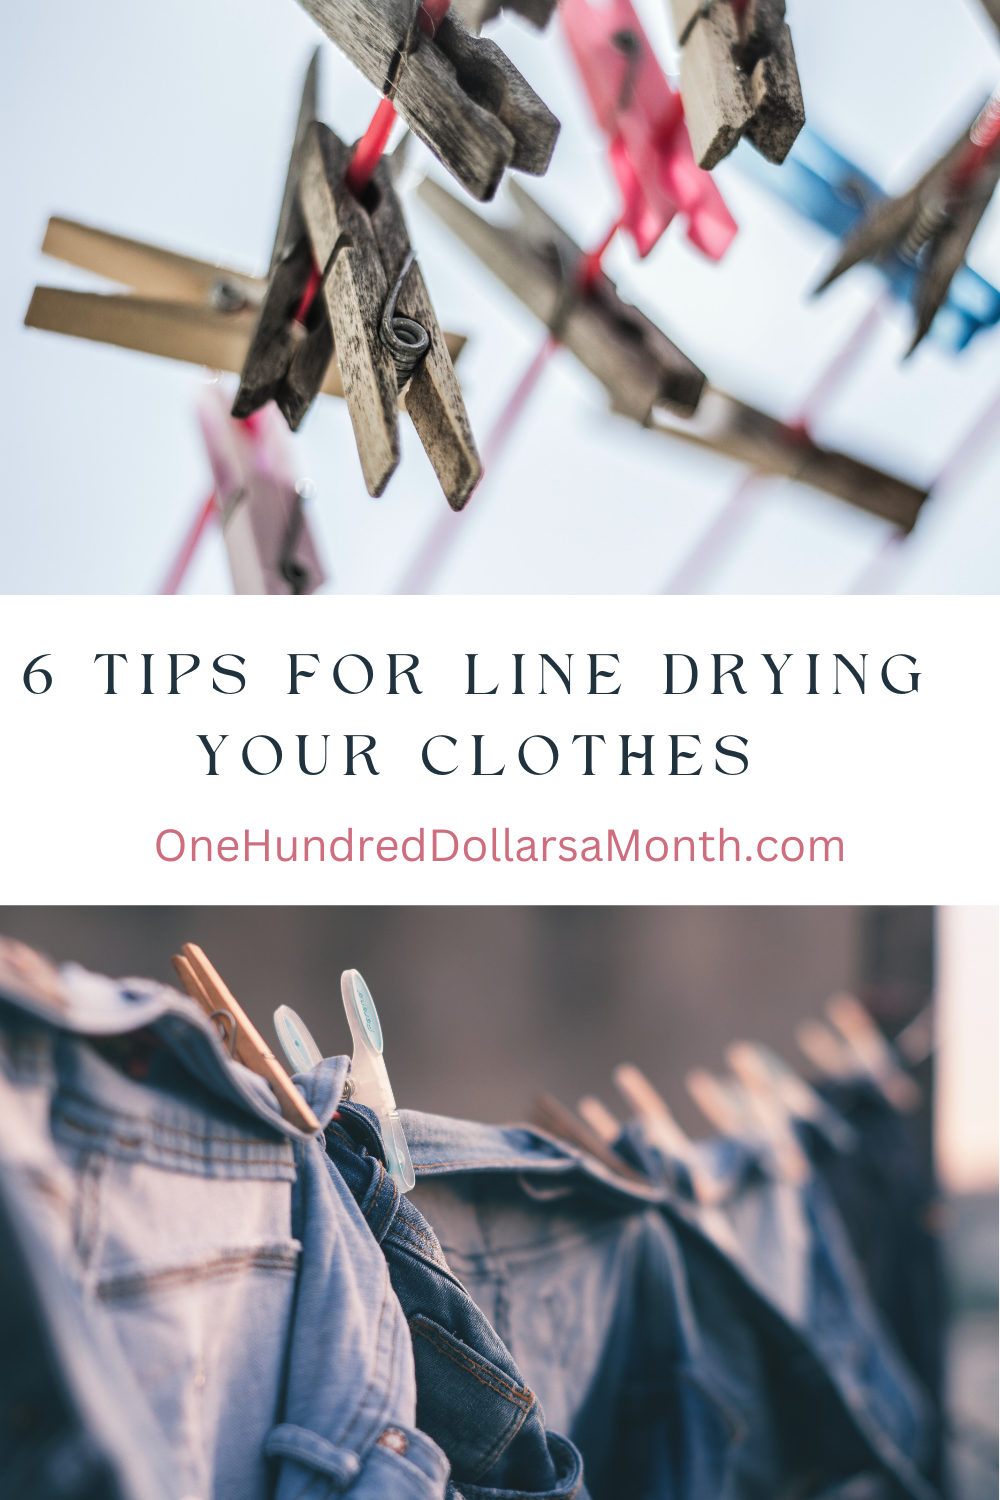 6 Tips for Line Drying Your Clothes